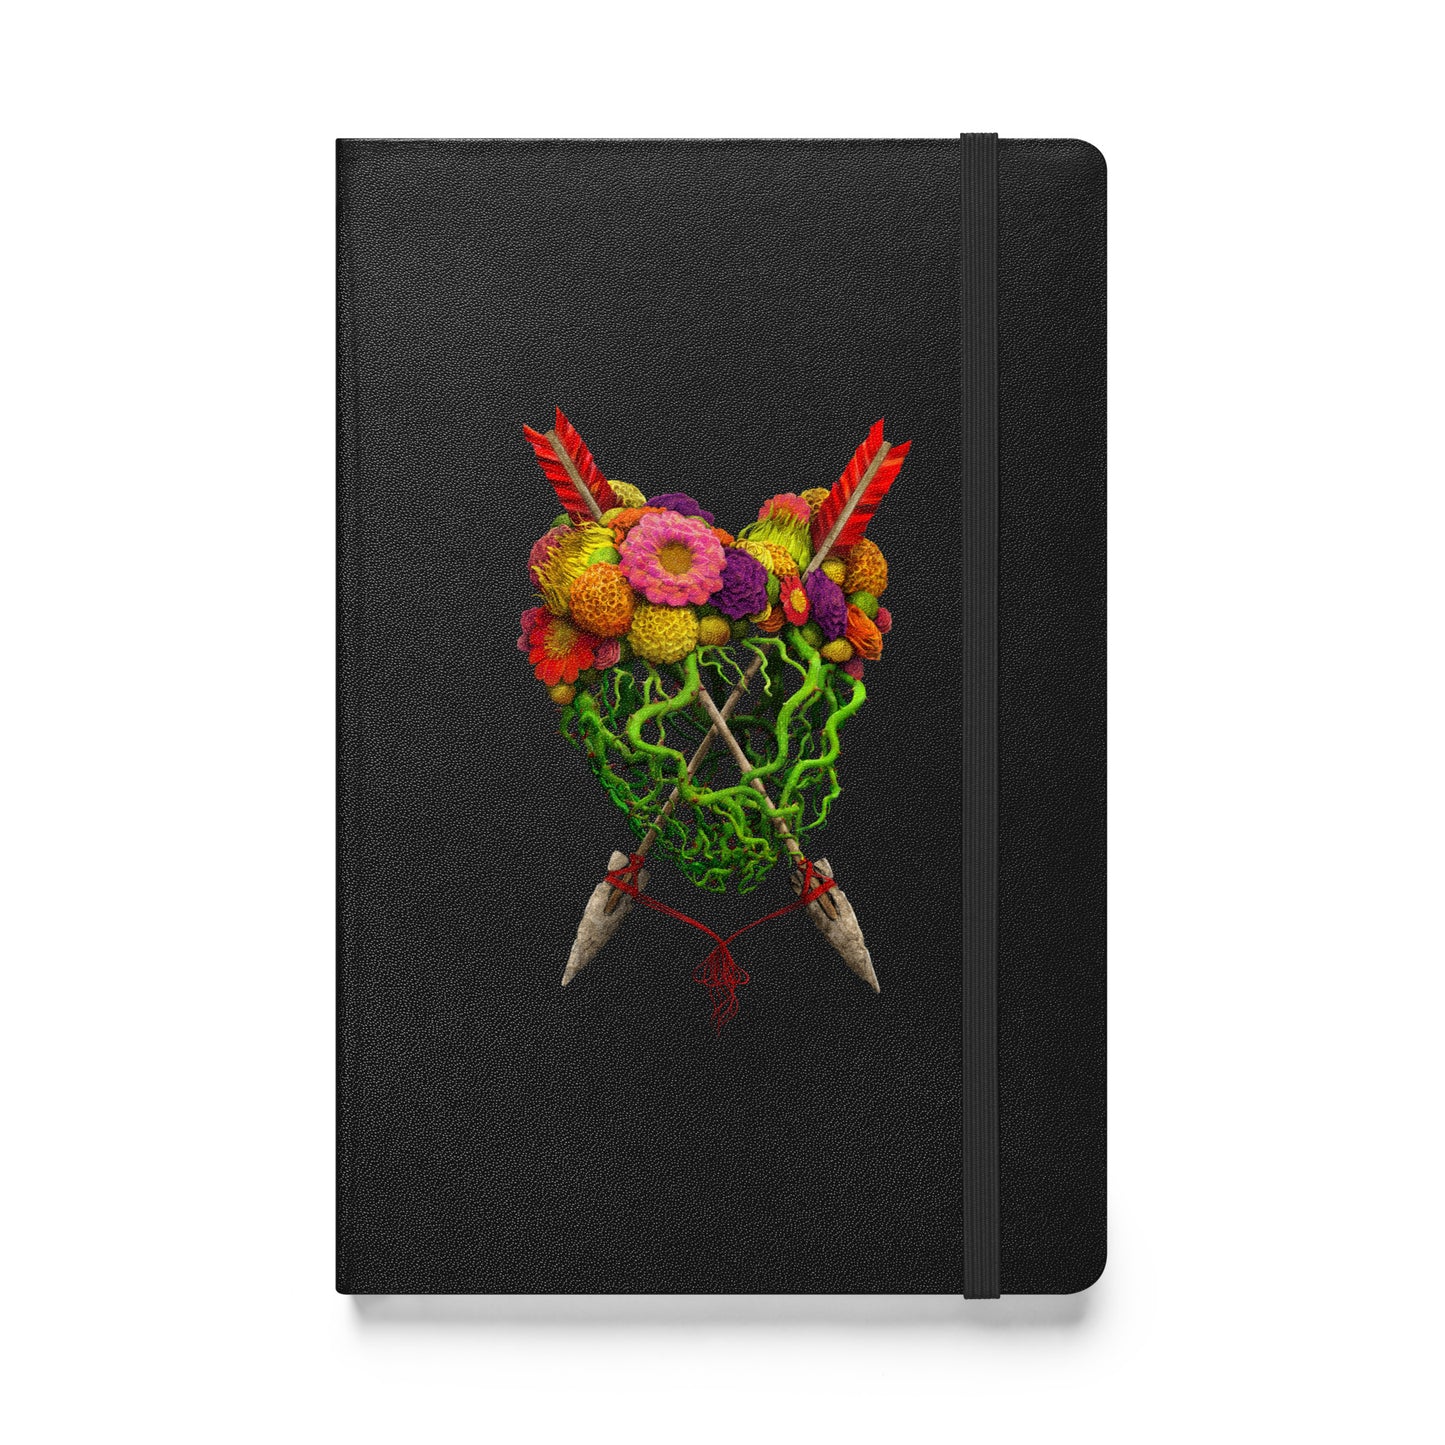 To Suffer Love hardcover bound notebook